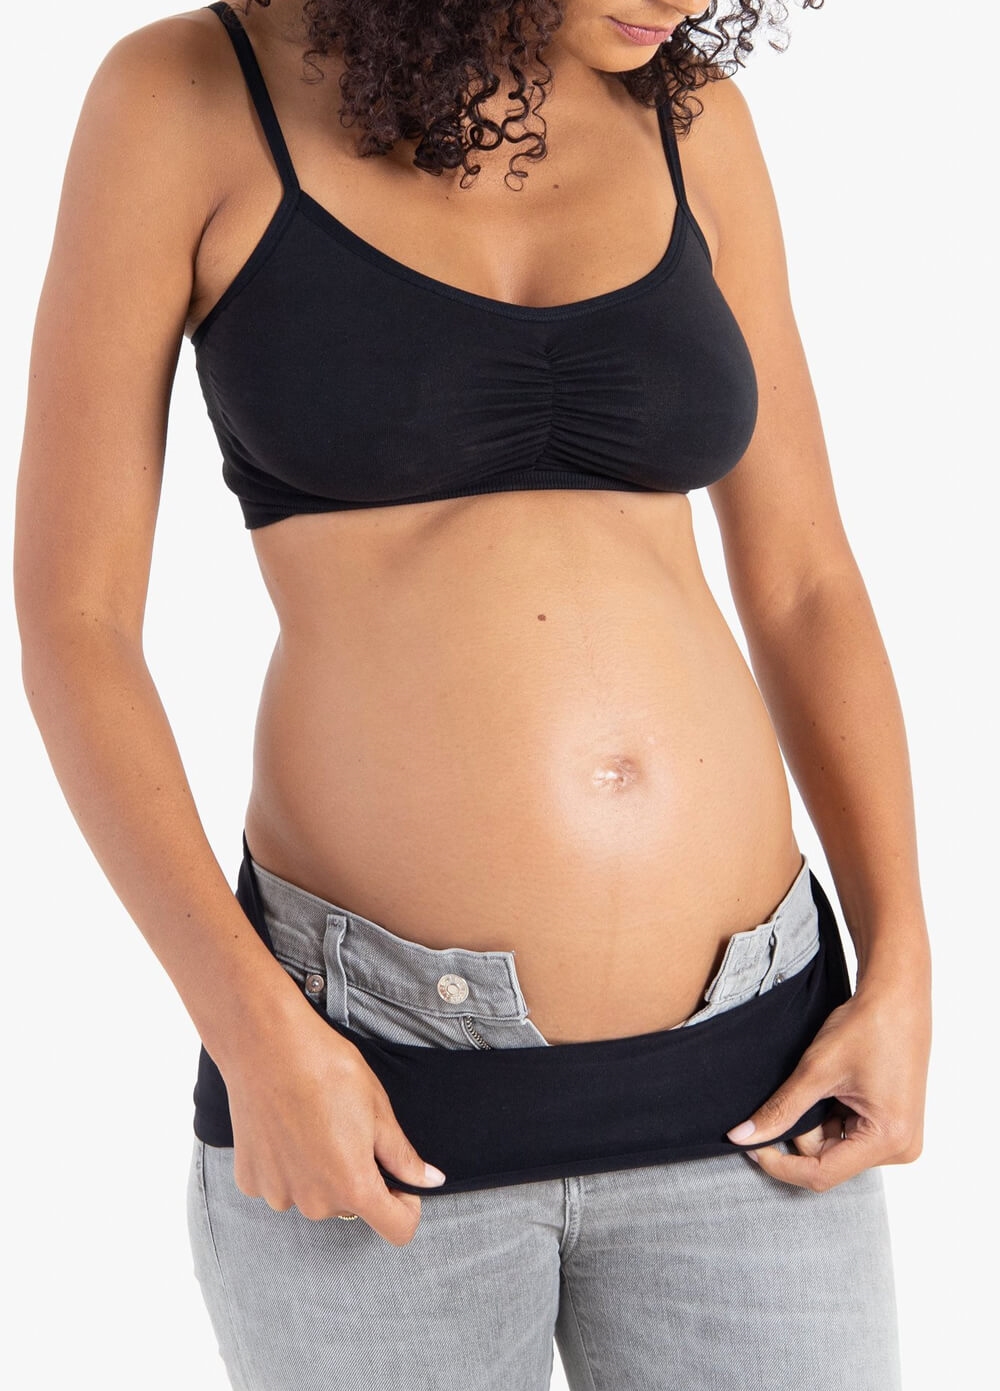 Bellinella Womens Belly Bands 